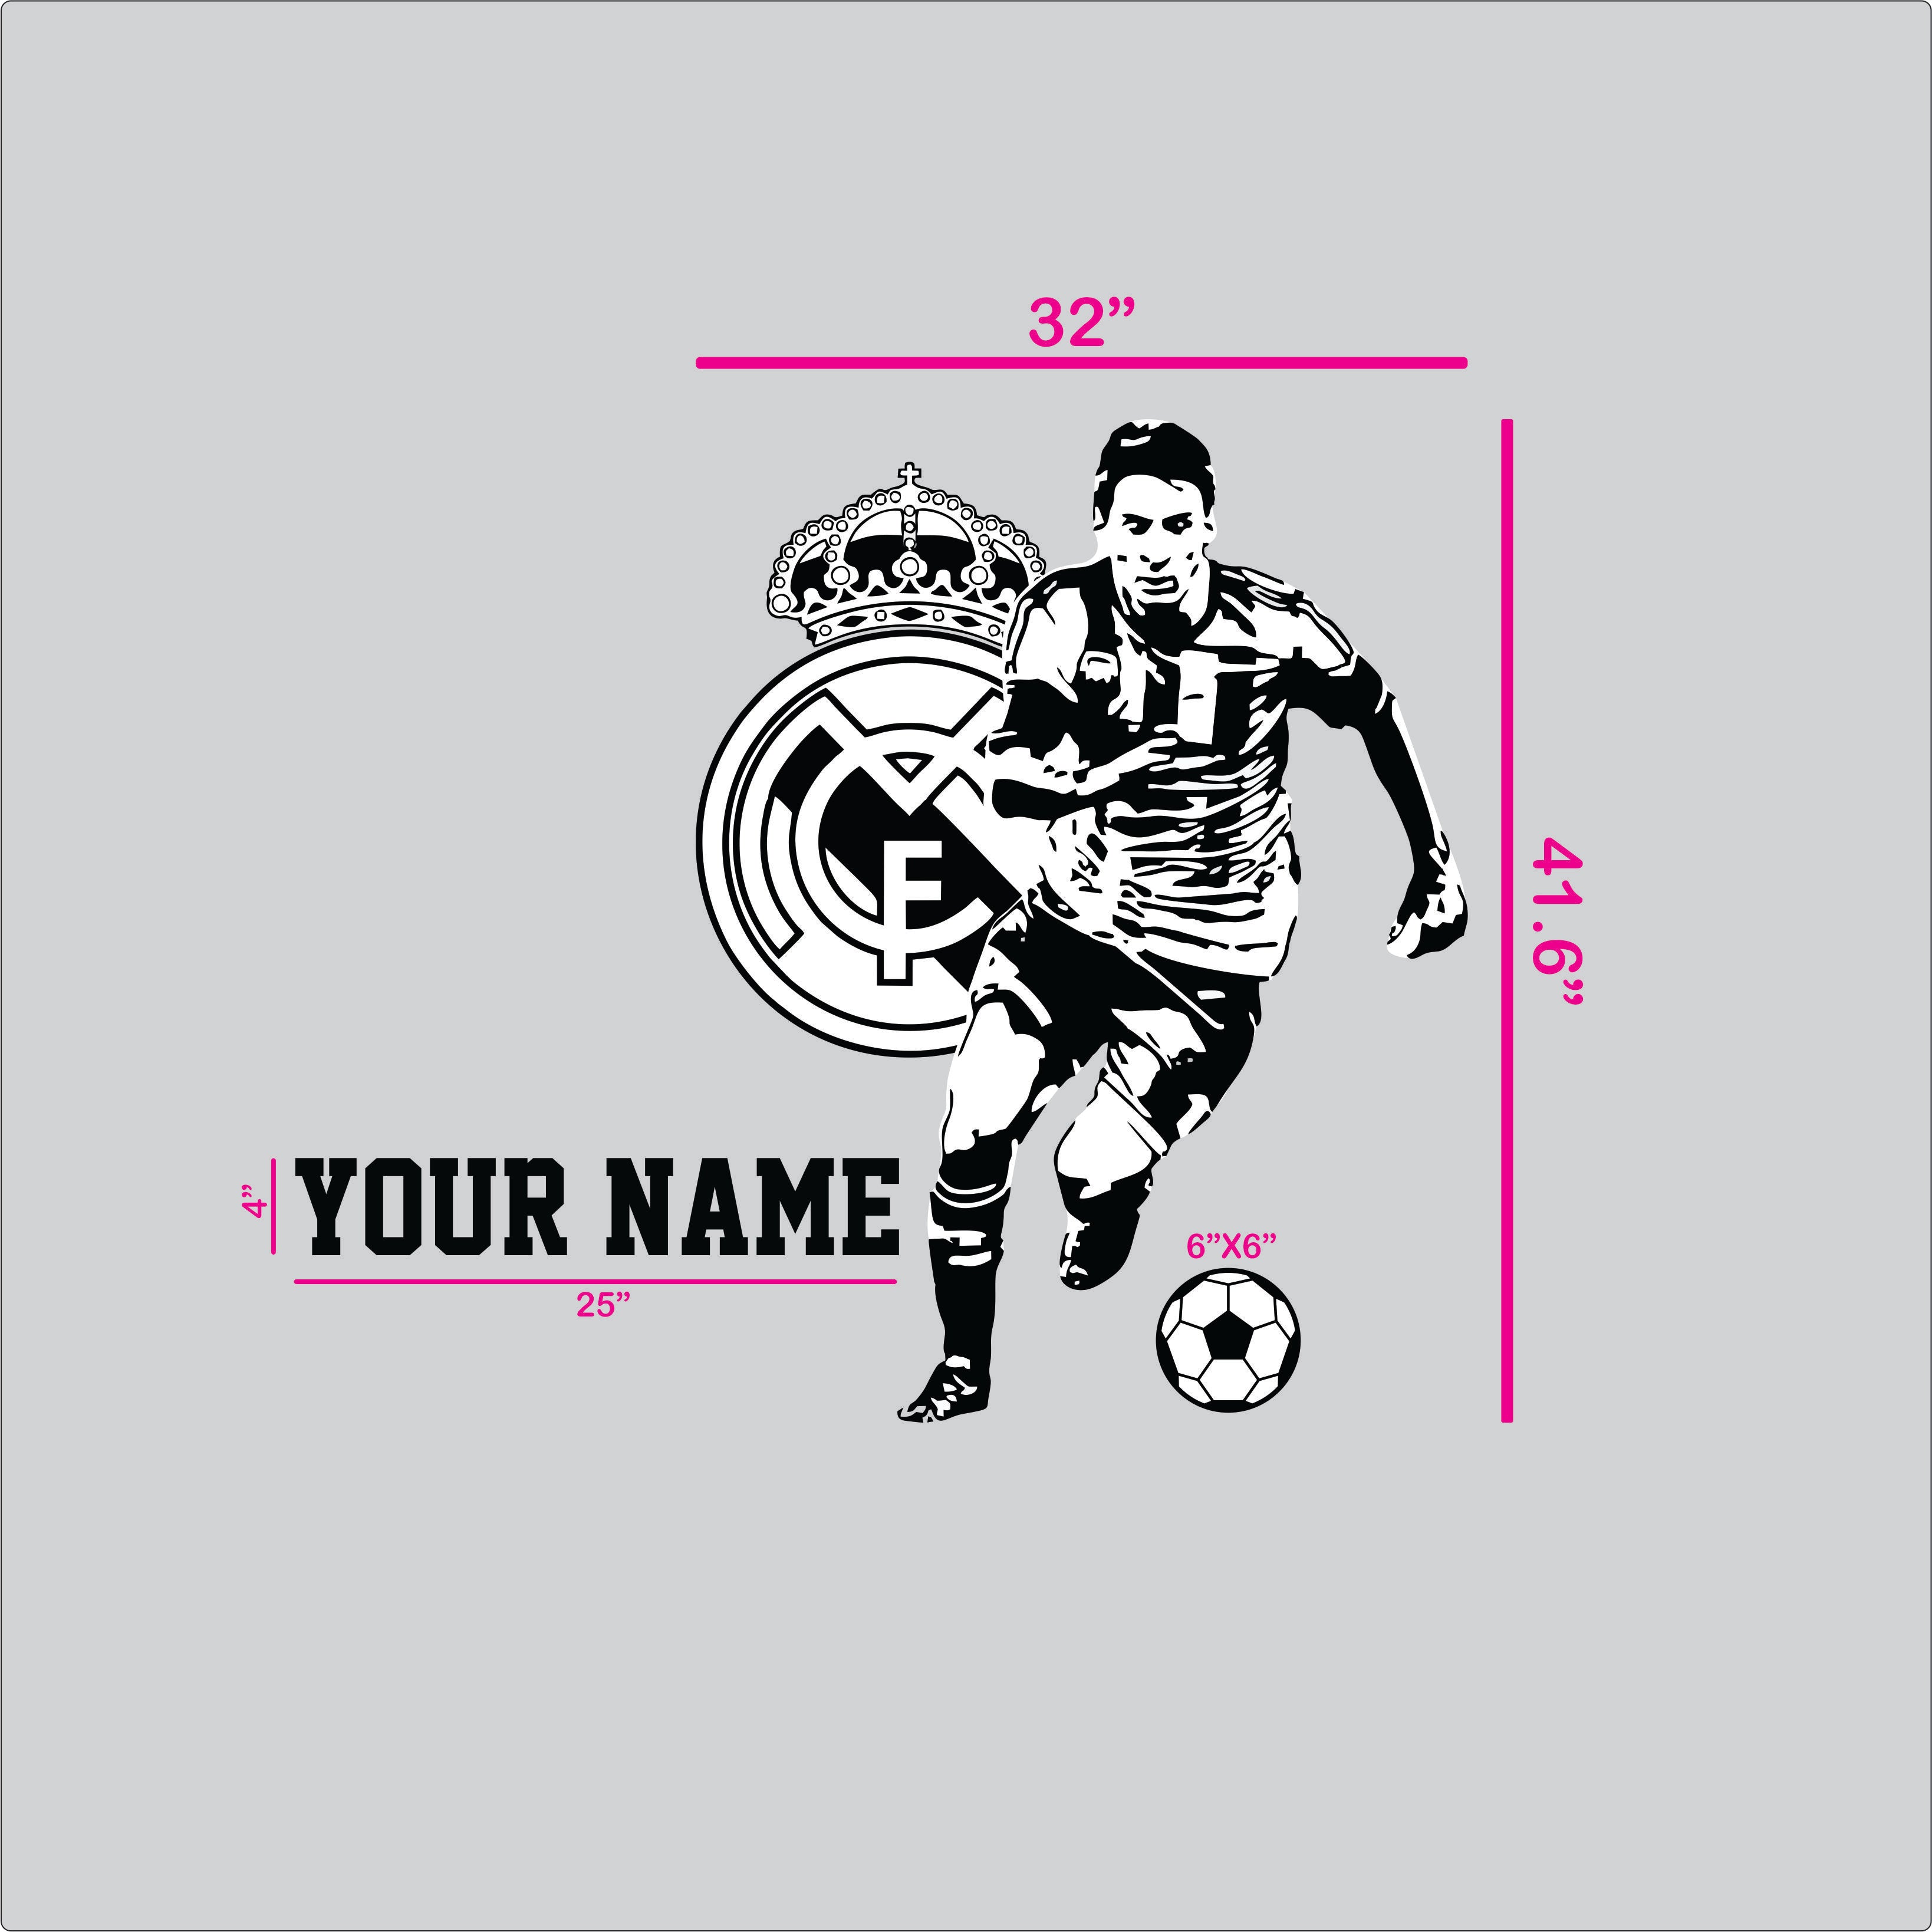 Ronaldo Wall Sticker With Your Name